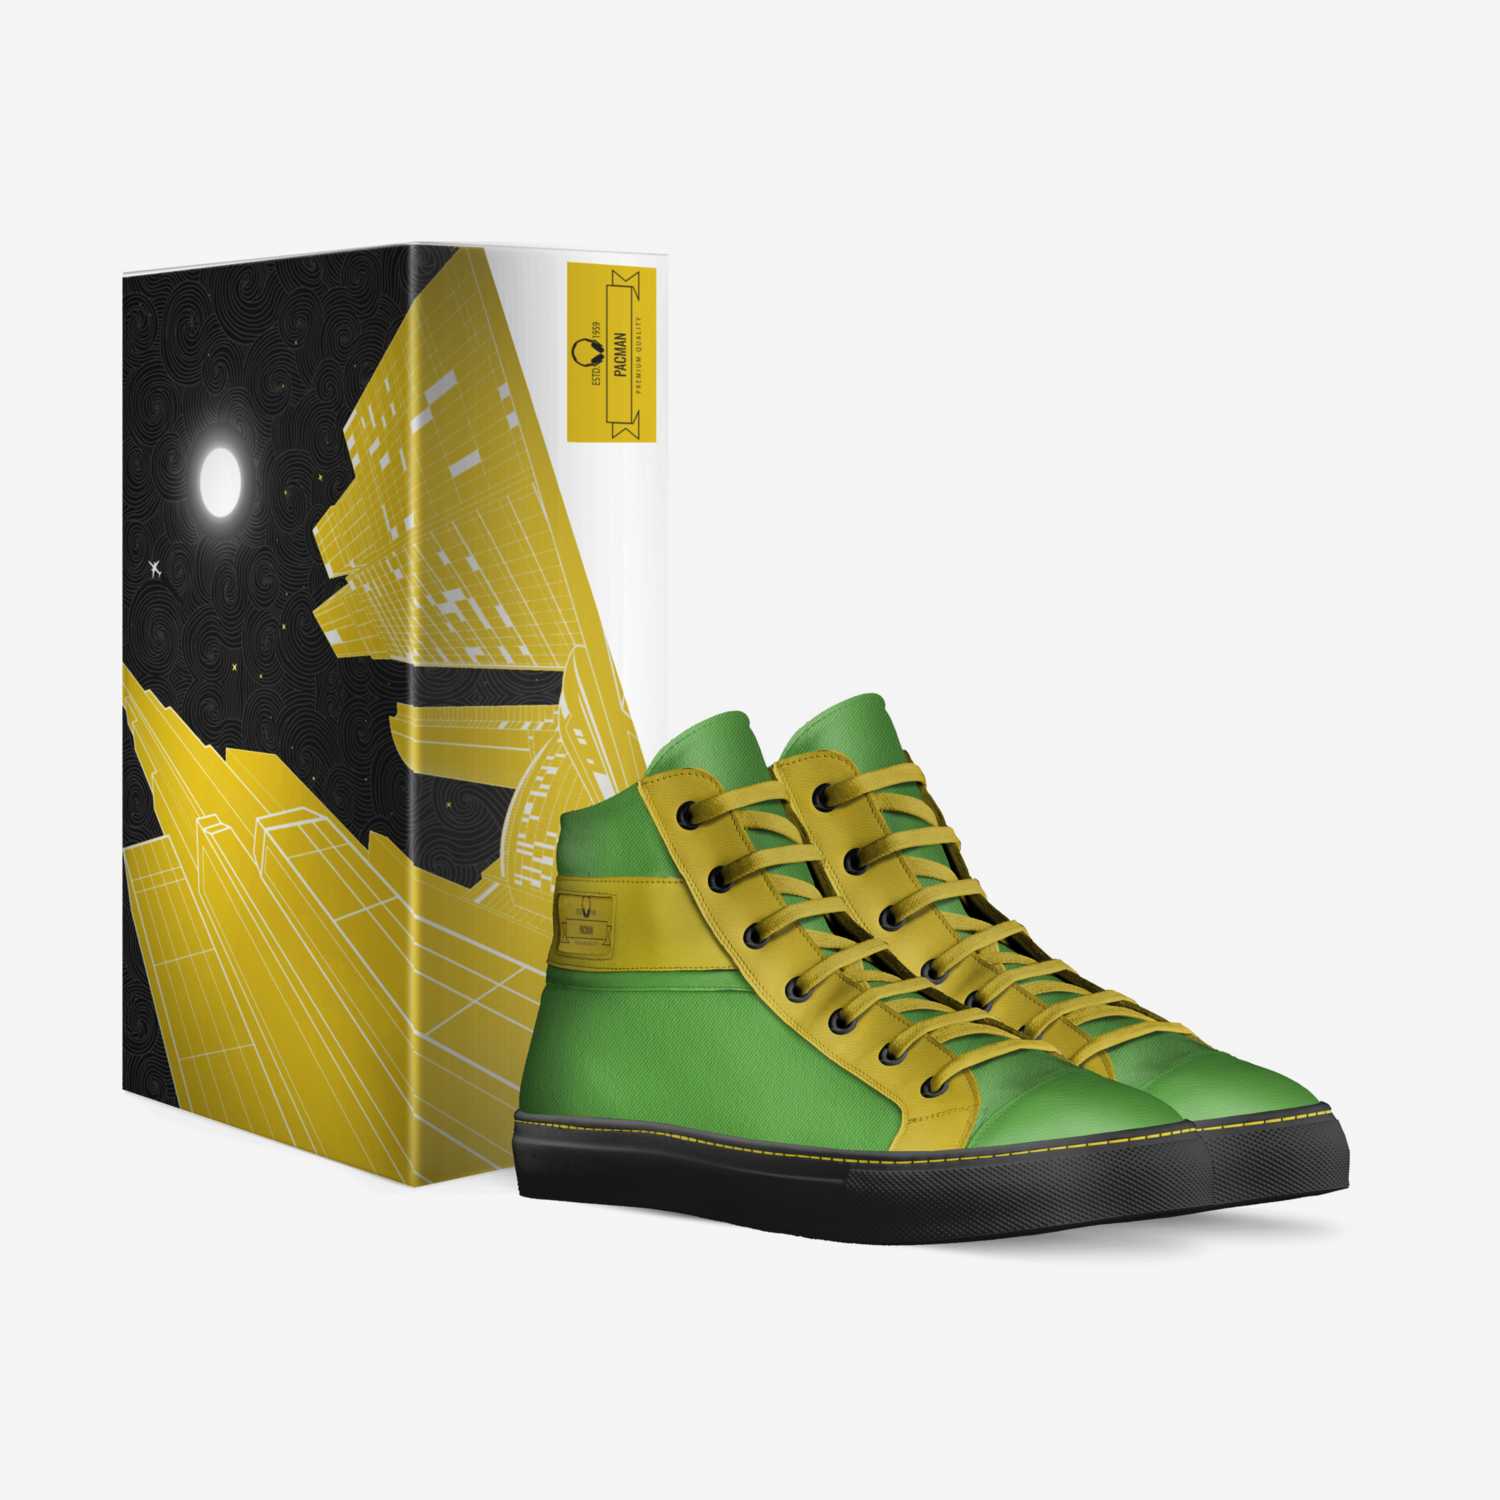 Pacman custom made in Italy shoes by Adrian Russell | Box view